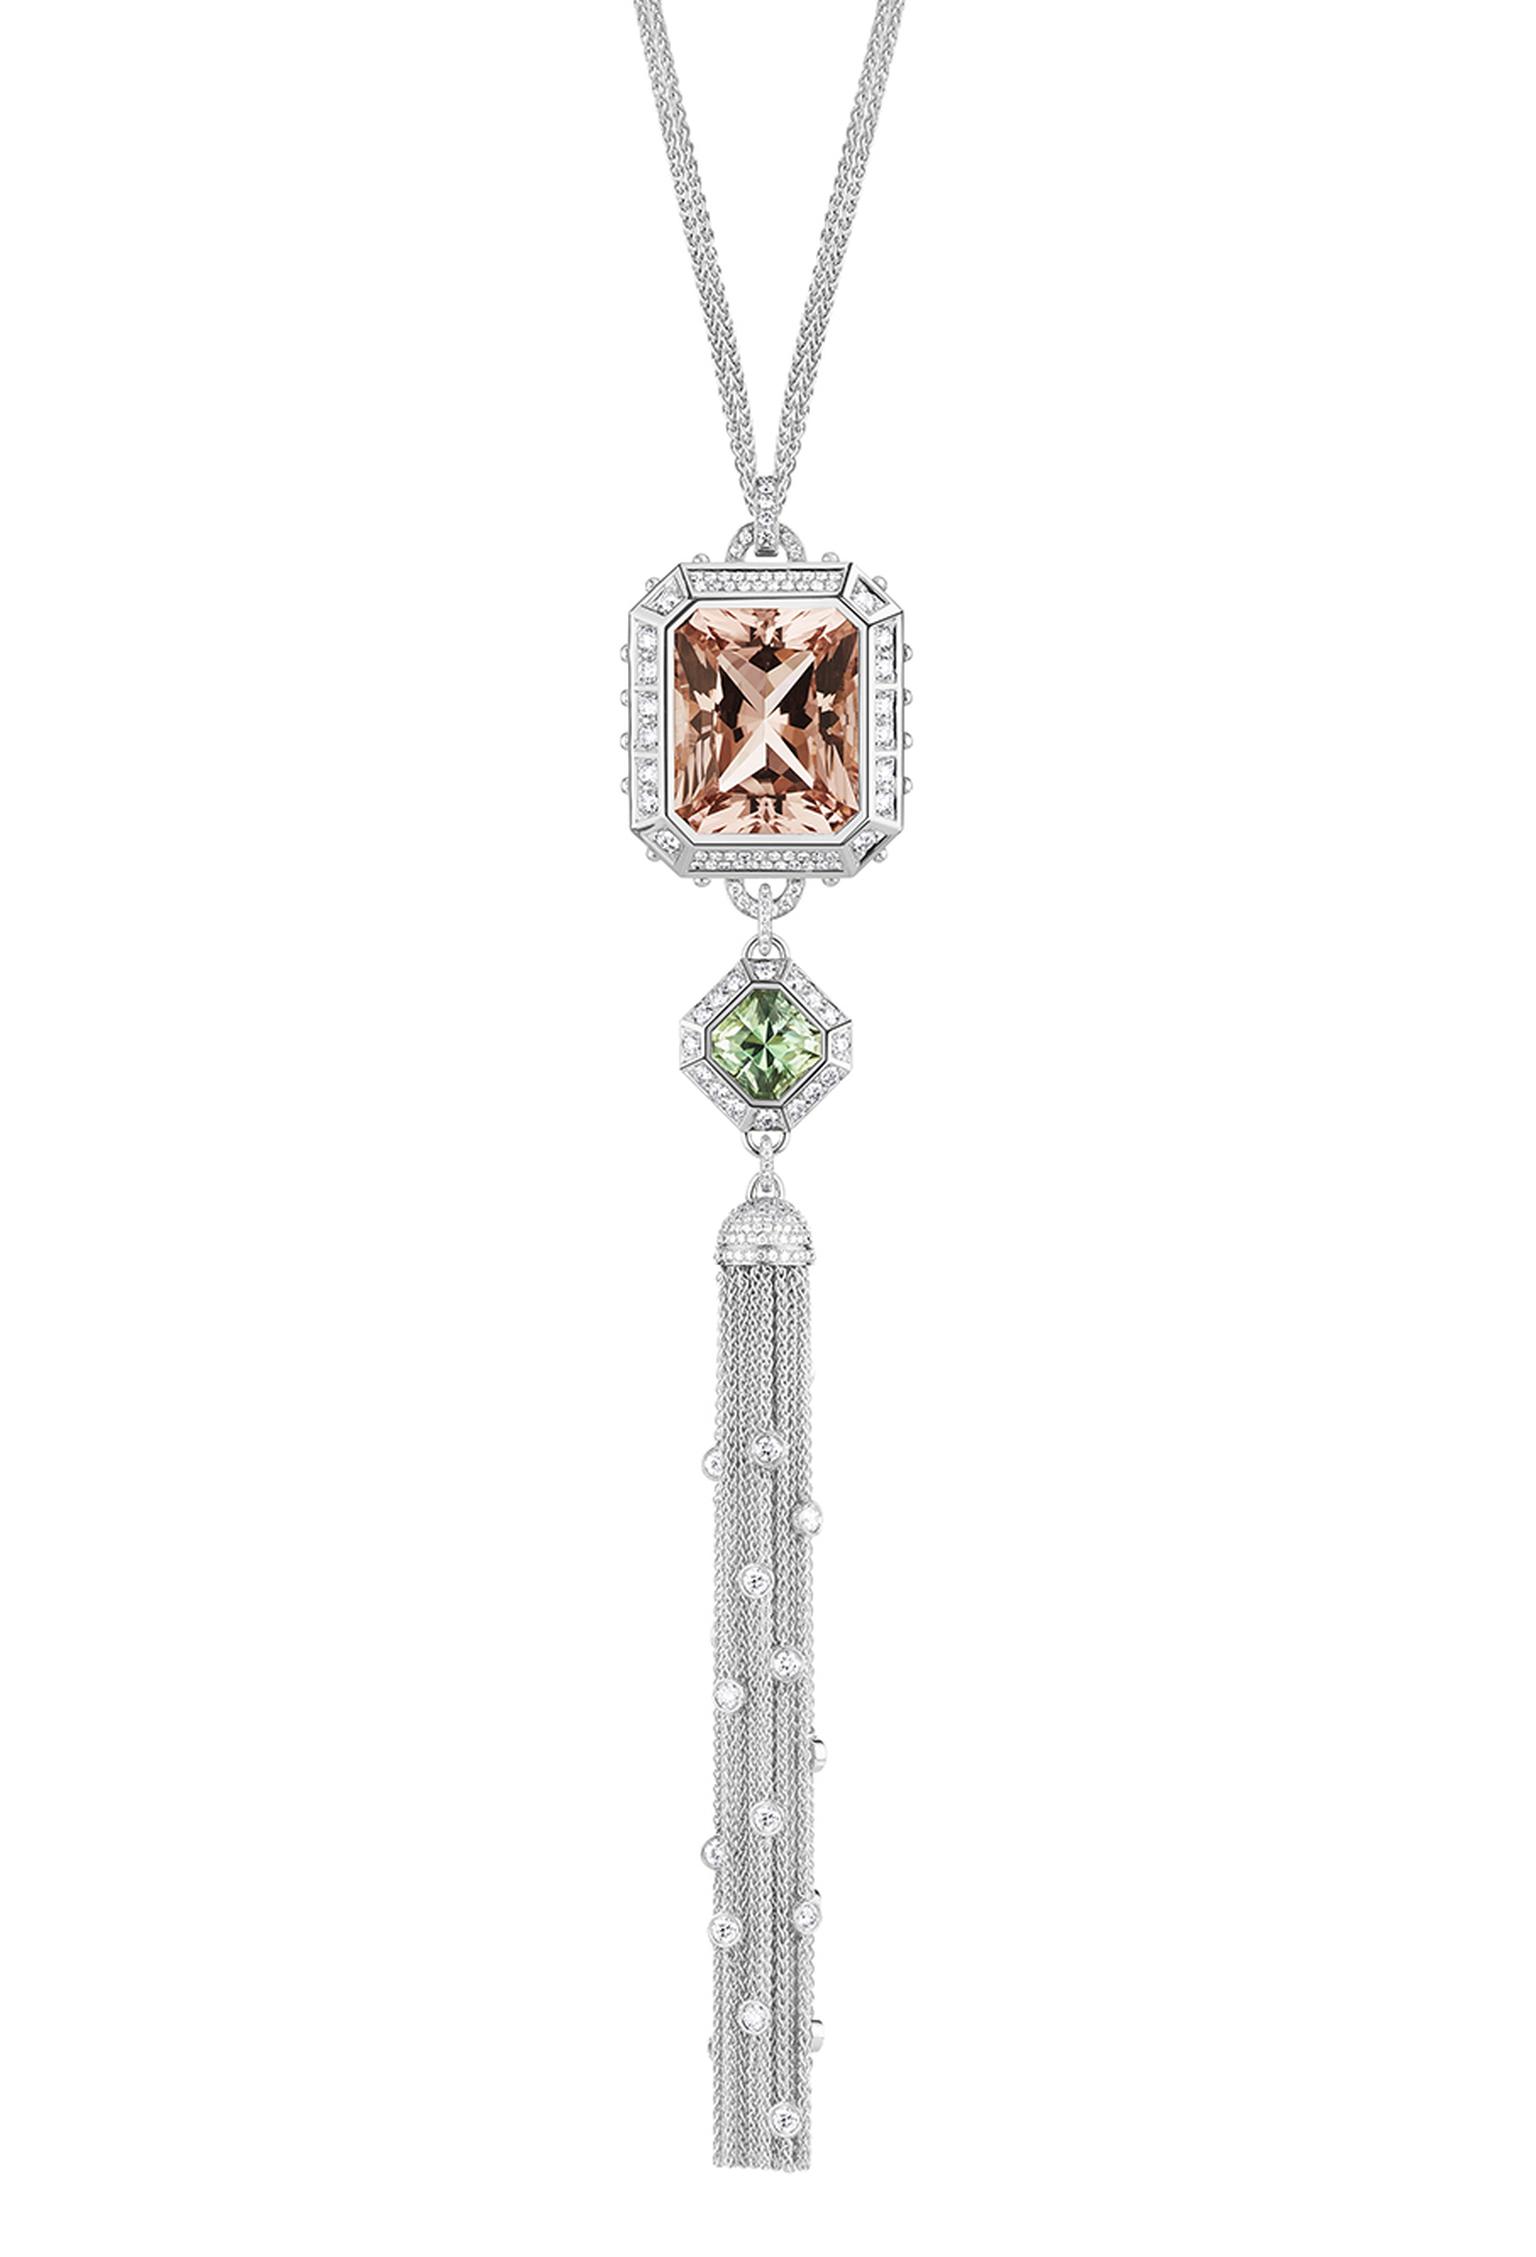 Louis Vuitton one-of-a-kind Emprise pendant necklace, set with a stunning 50-60ct morganite, mint green tourmaline and diamonds